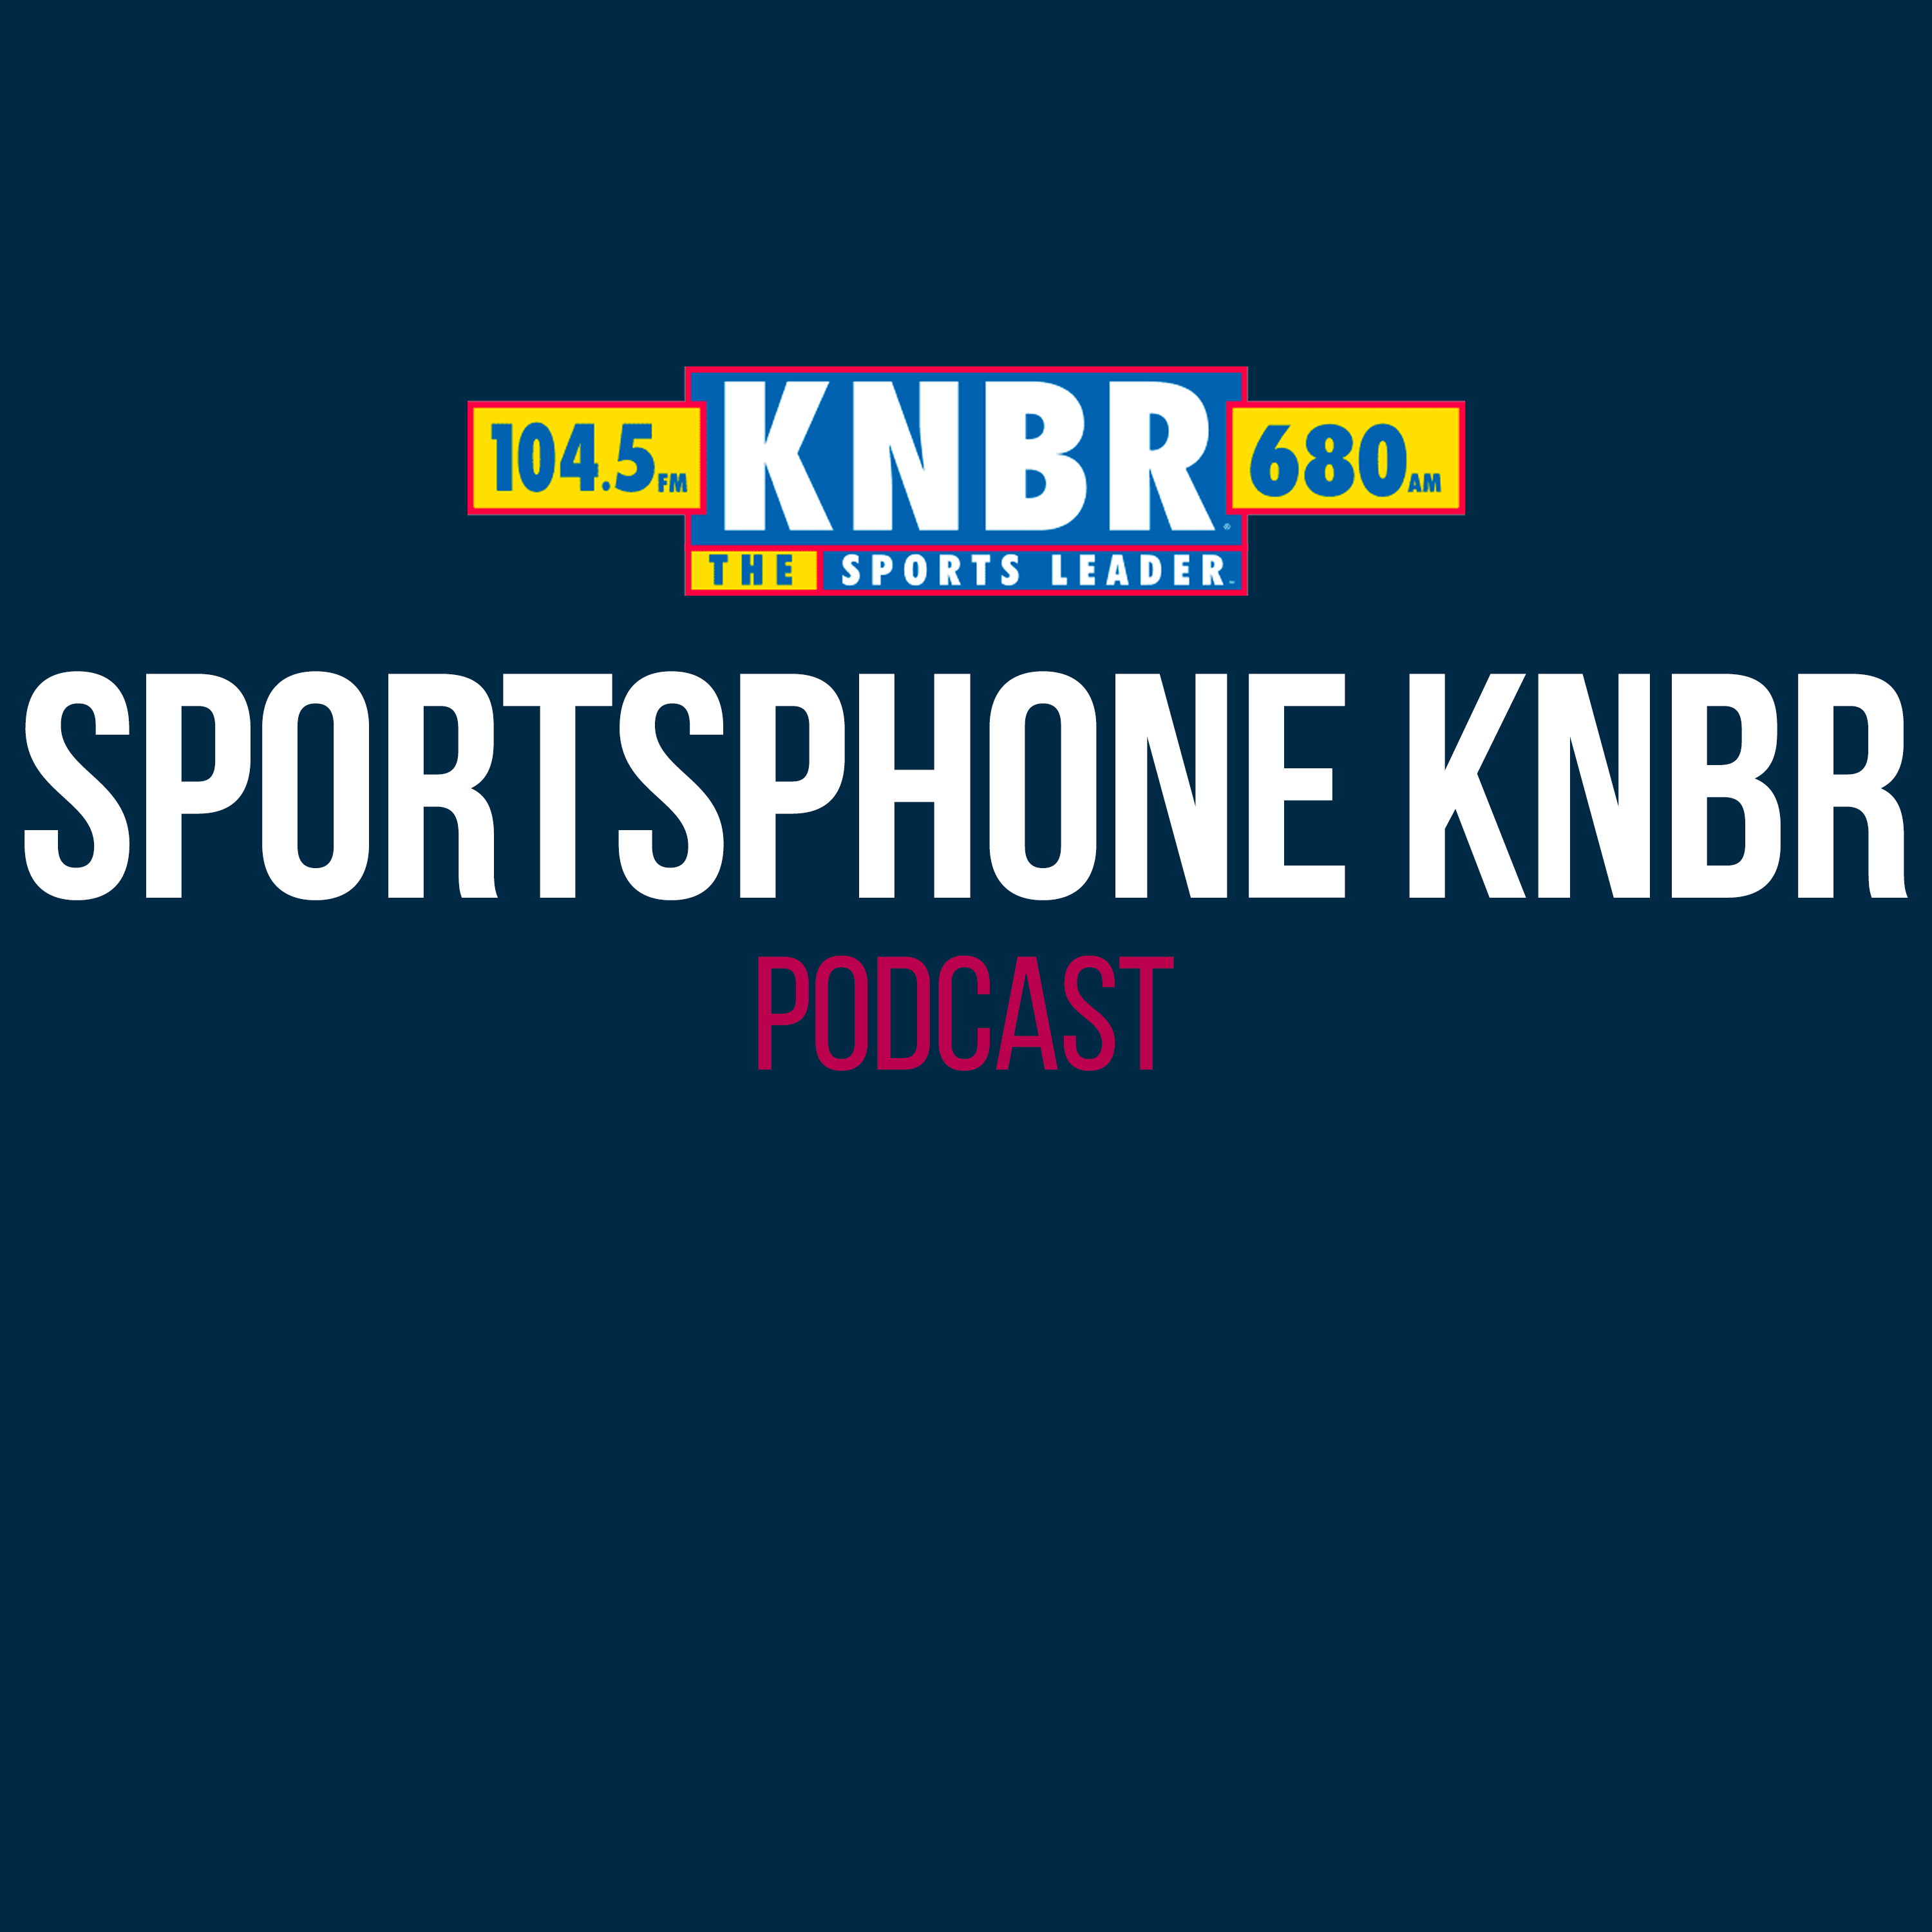 5-16 Mark Ibanez joins Sportsphone KNBR with Bill Laskey to discuss the Giants recent home stretch & upcoming series vs. the Rockies